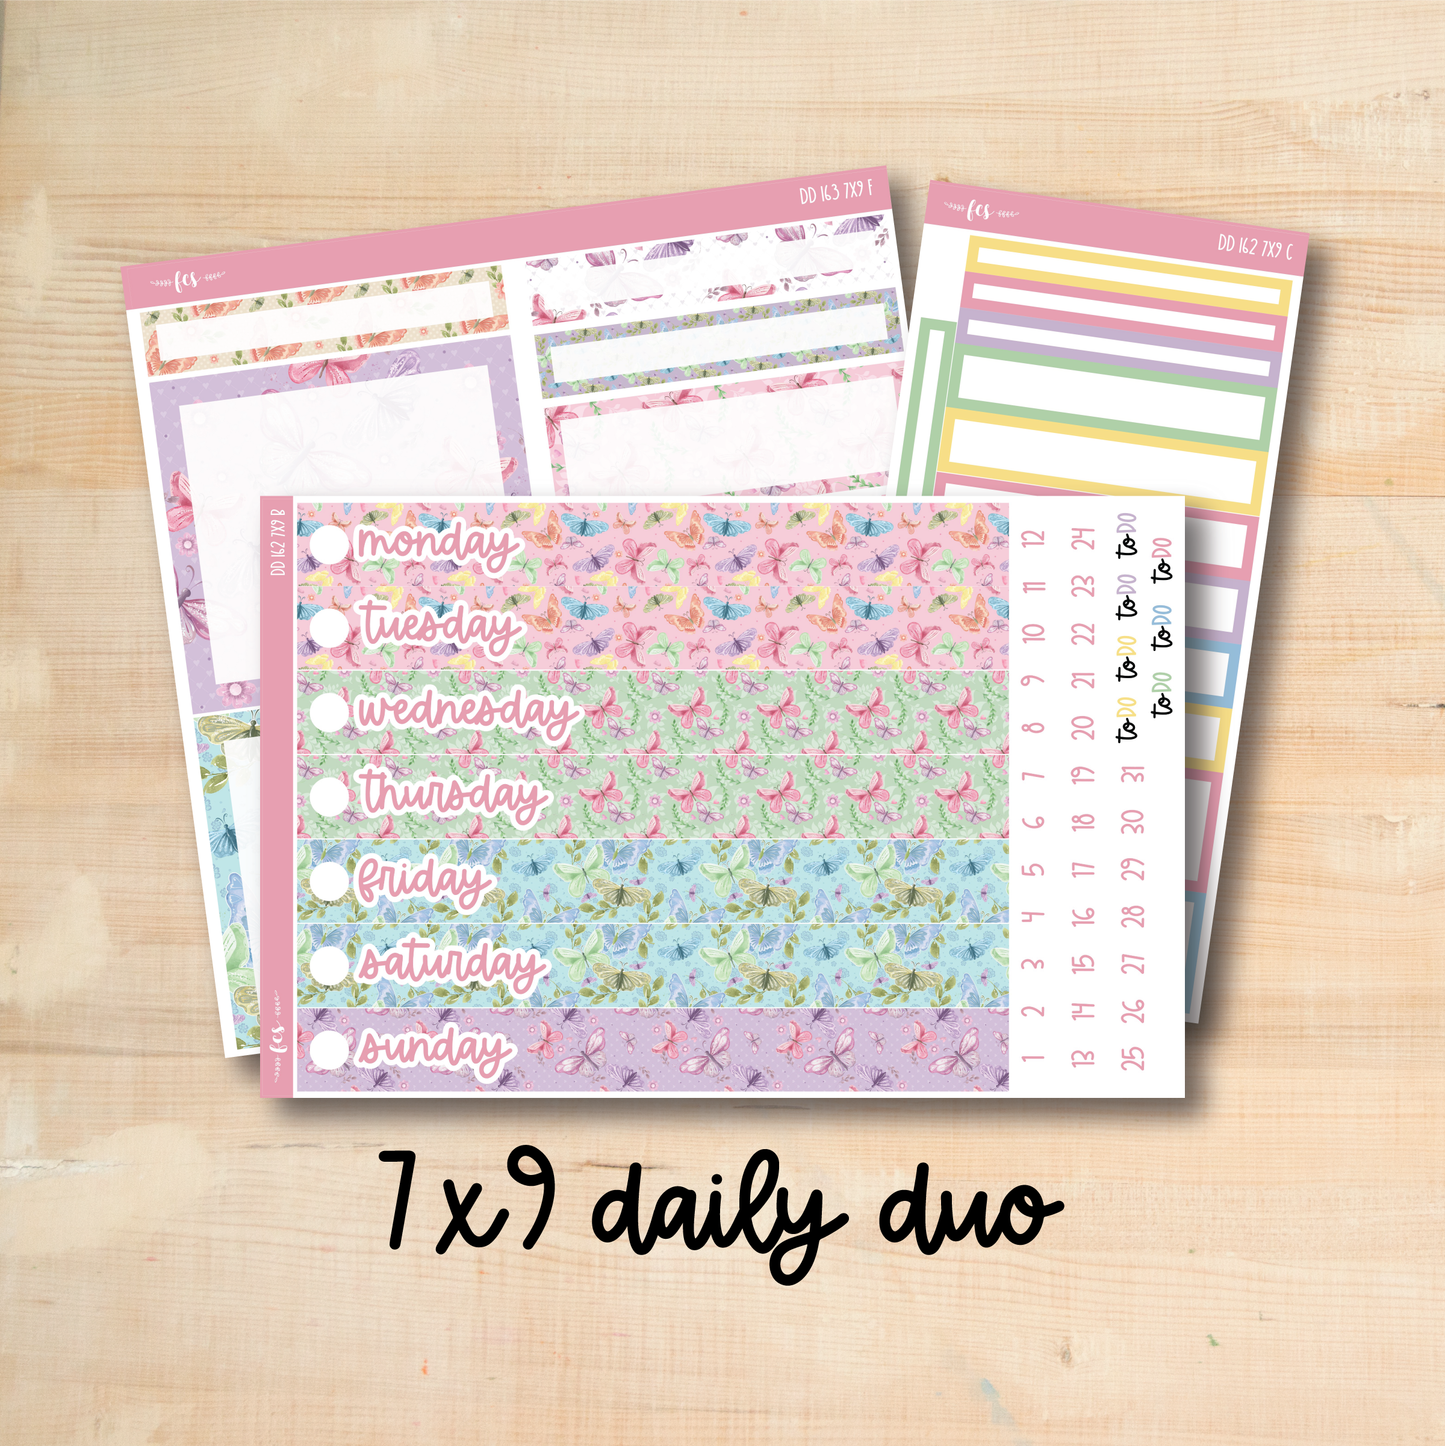 7x9 Daily Duo 162 || FLUTTERBYE 7x9 Daily Duo Kit